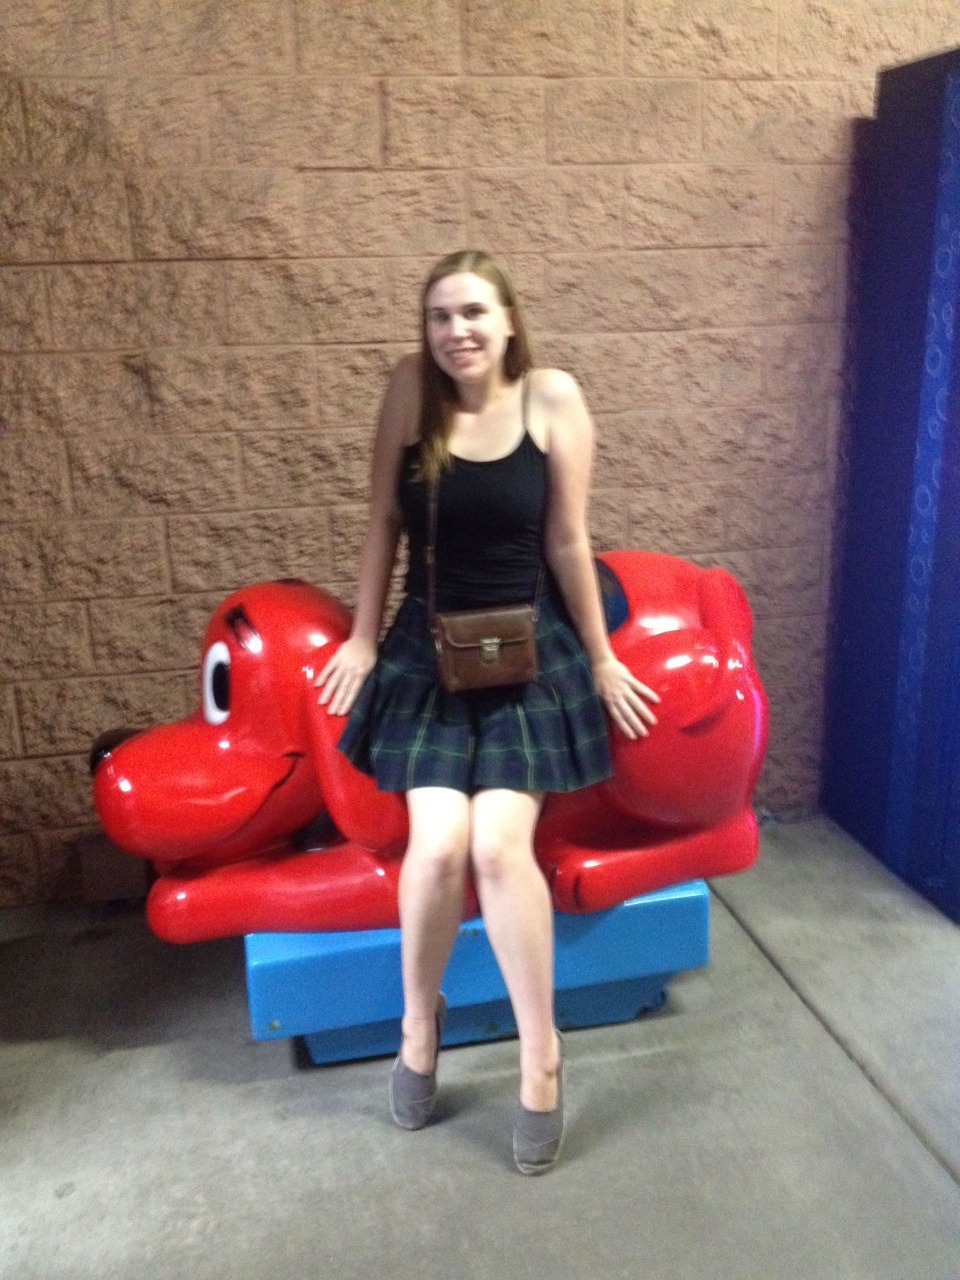 Here&rsquo;s me chilling in a school skirt on a Clifford dog outside a grocery